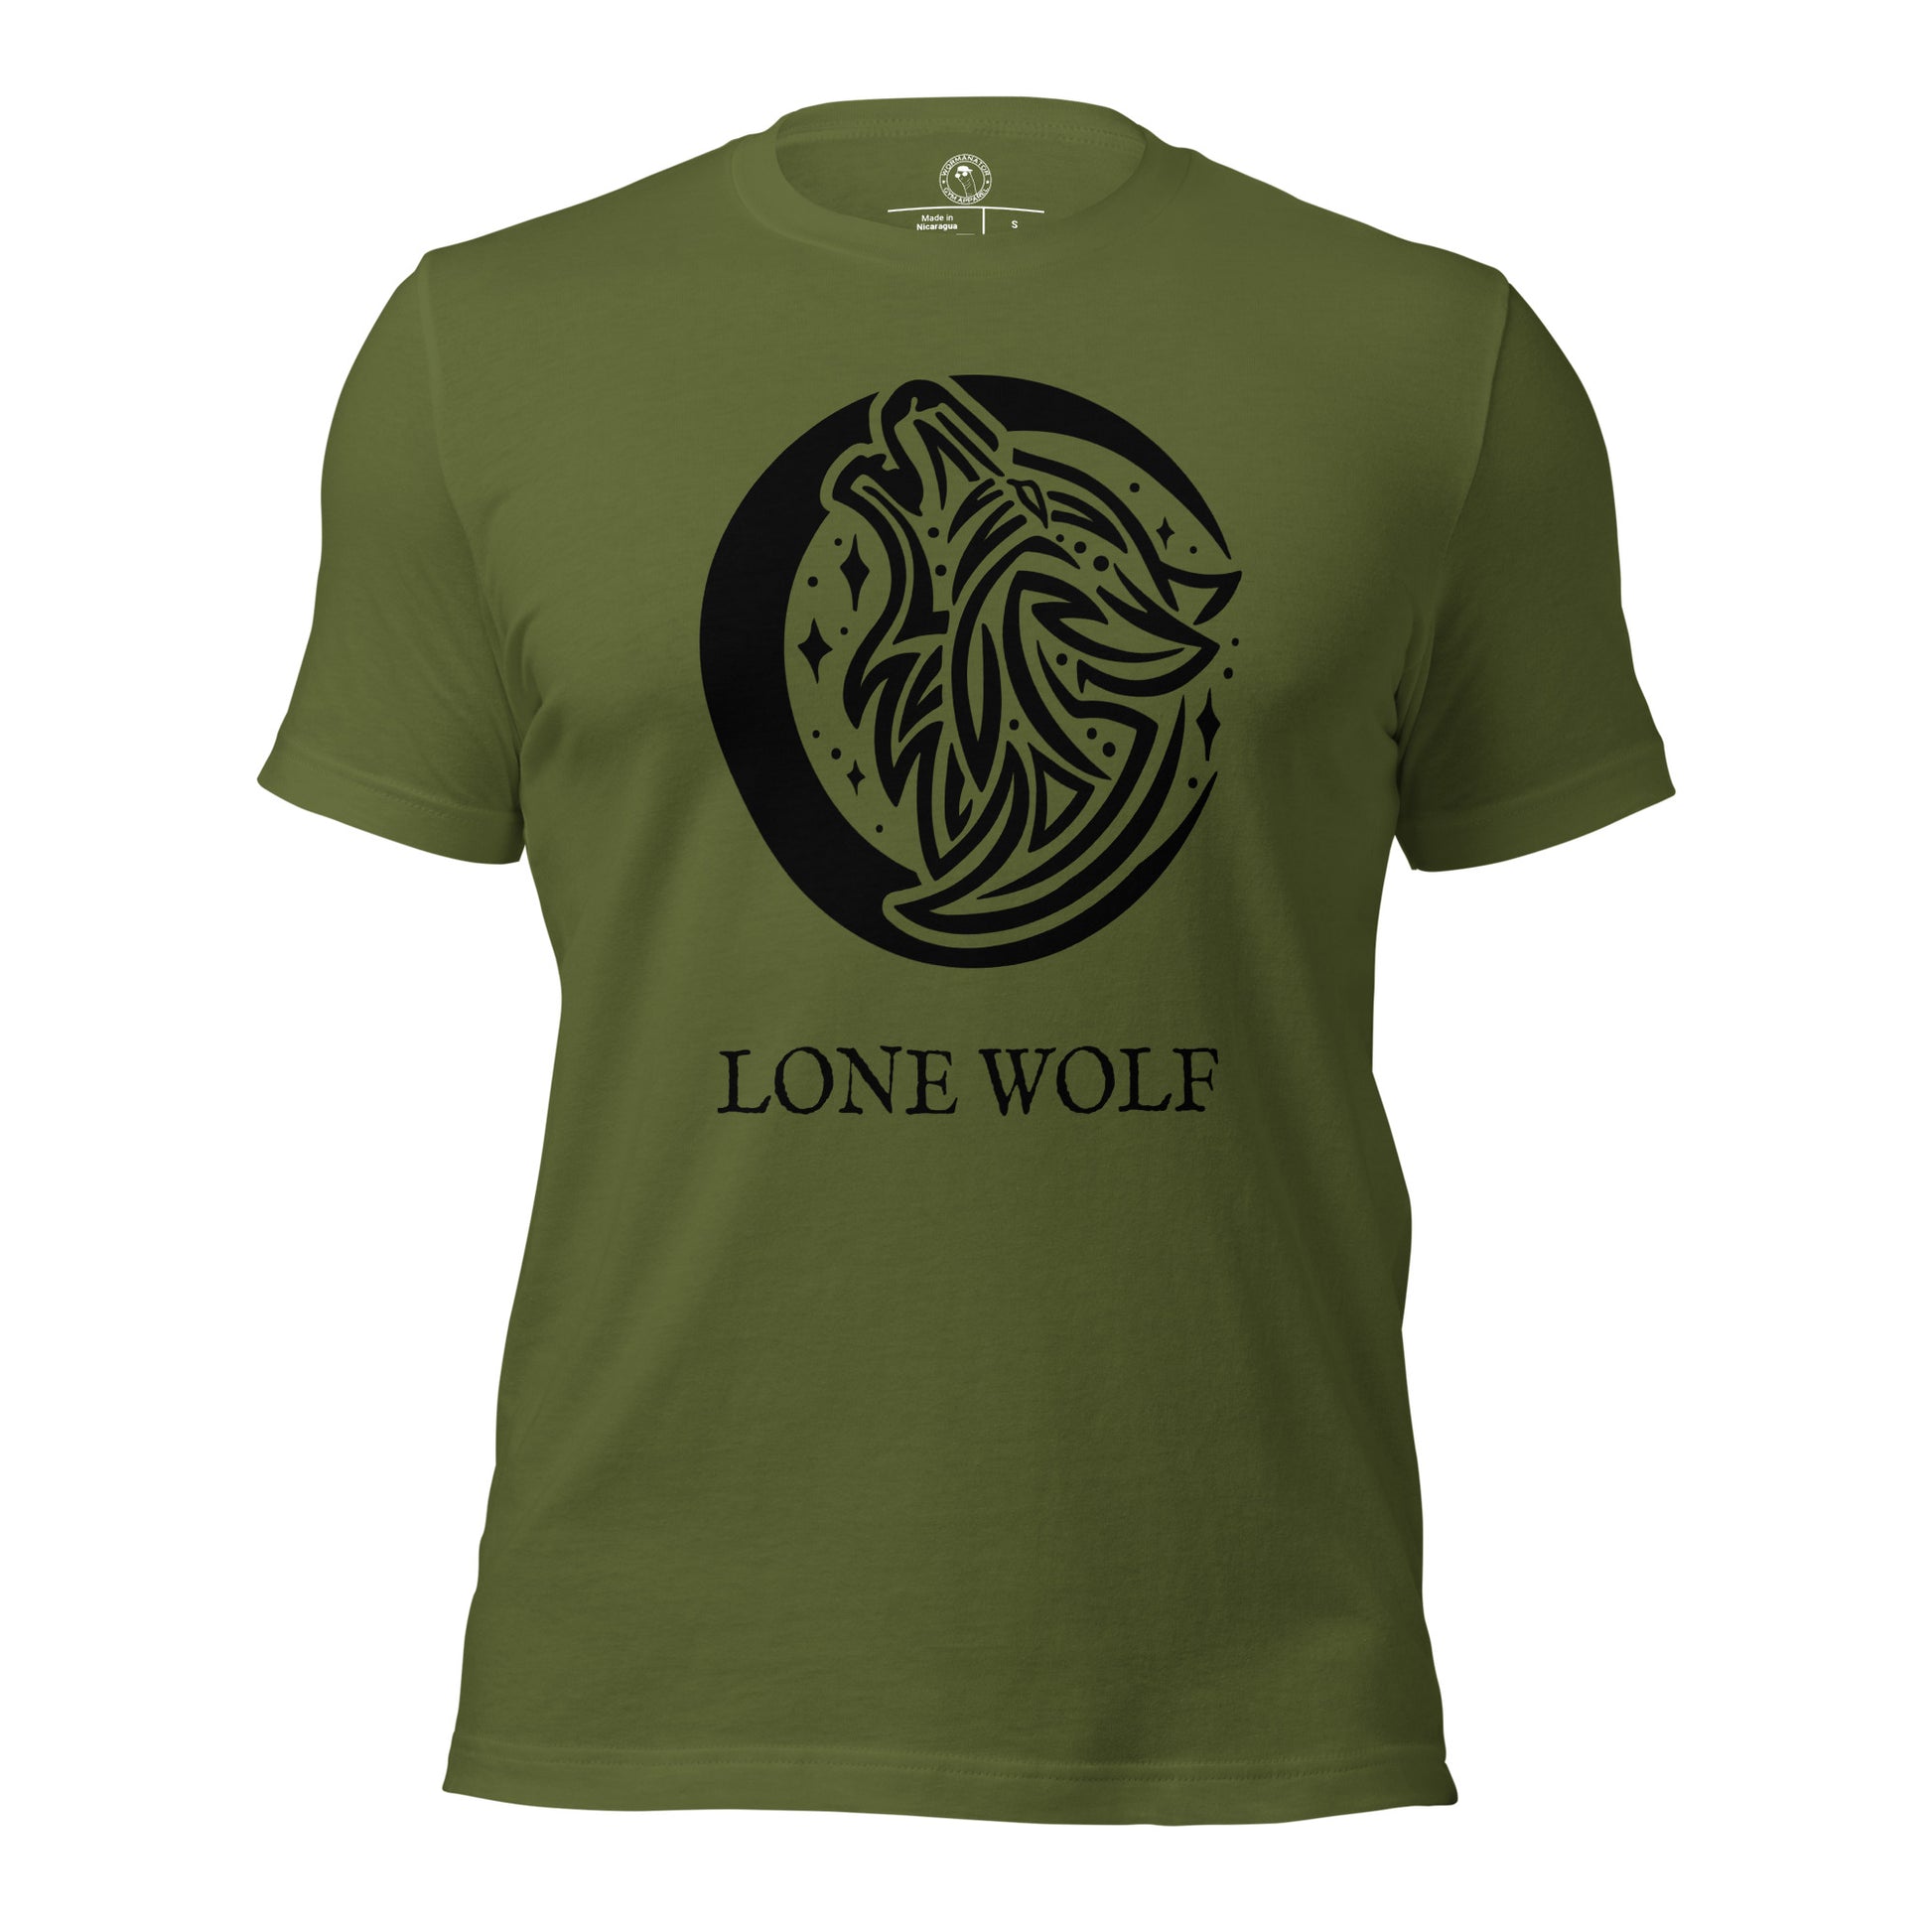 Lone Wolf Shirt in Olive Green